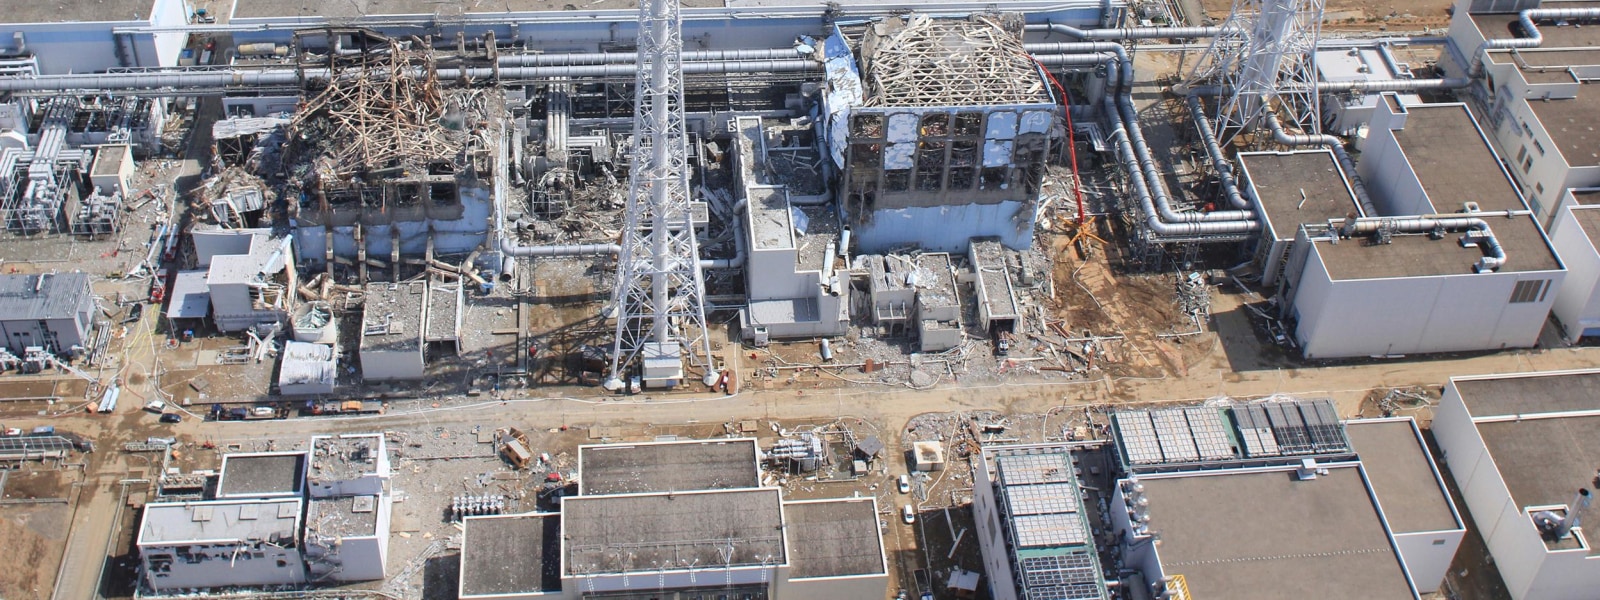 Image: An aerial view of the Fukushima Daiichi Nuclear Power Station is seen in Fukushima Prefecture